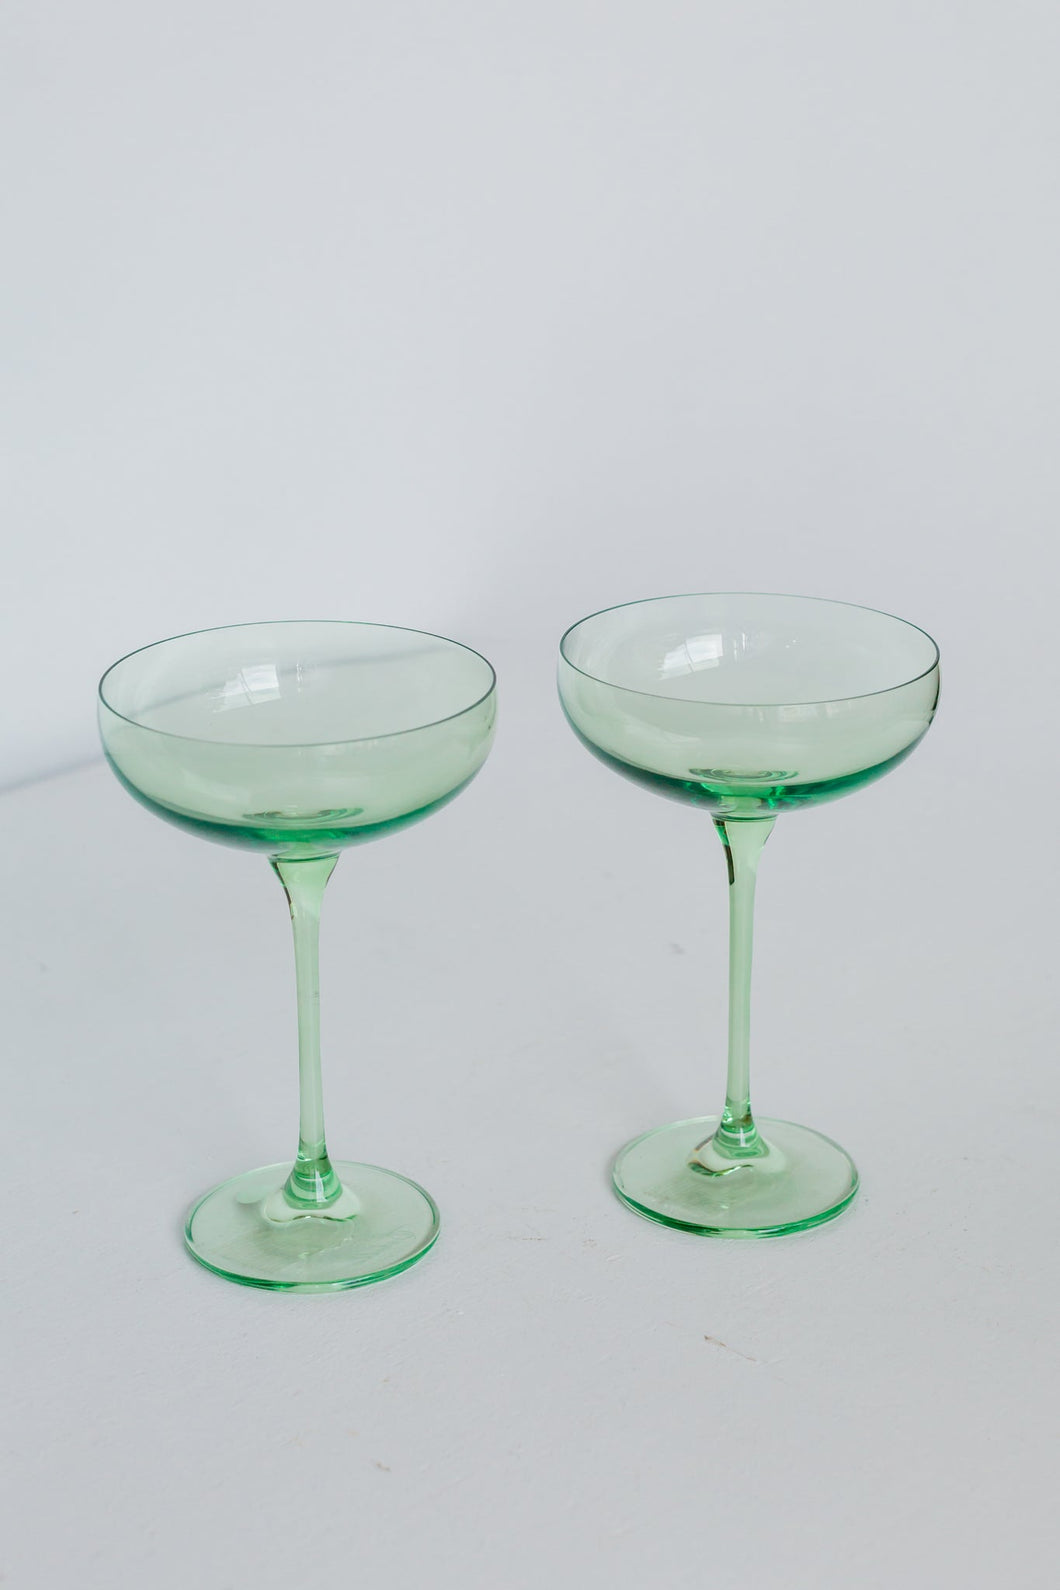 Estelle Champagne Coupes, Set of 2 Mint Green